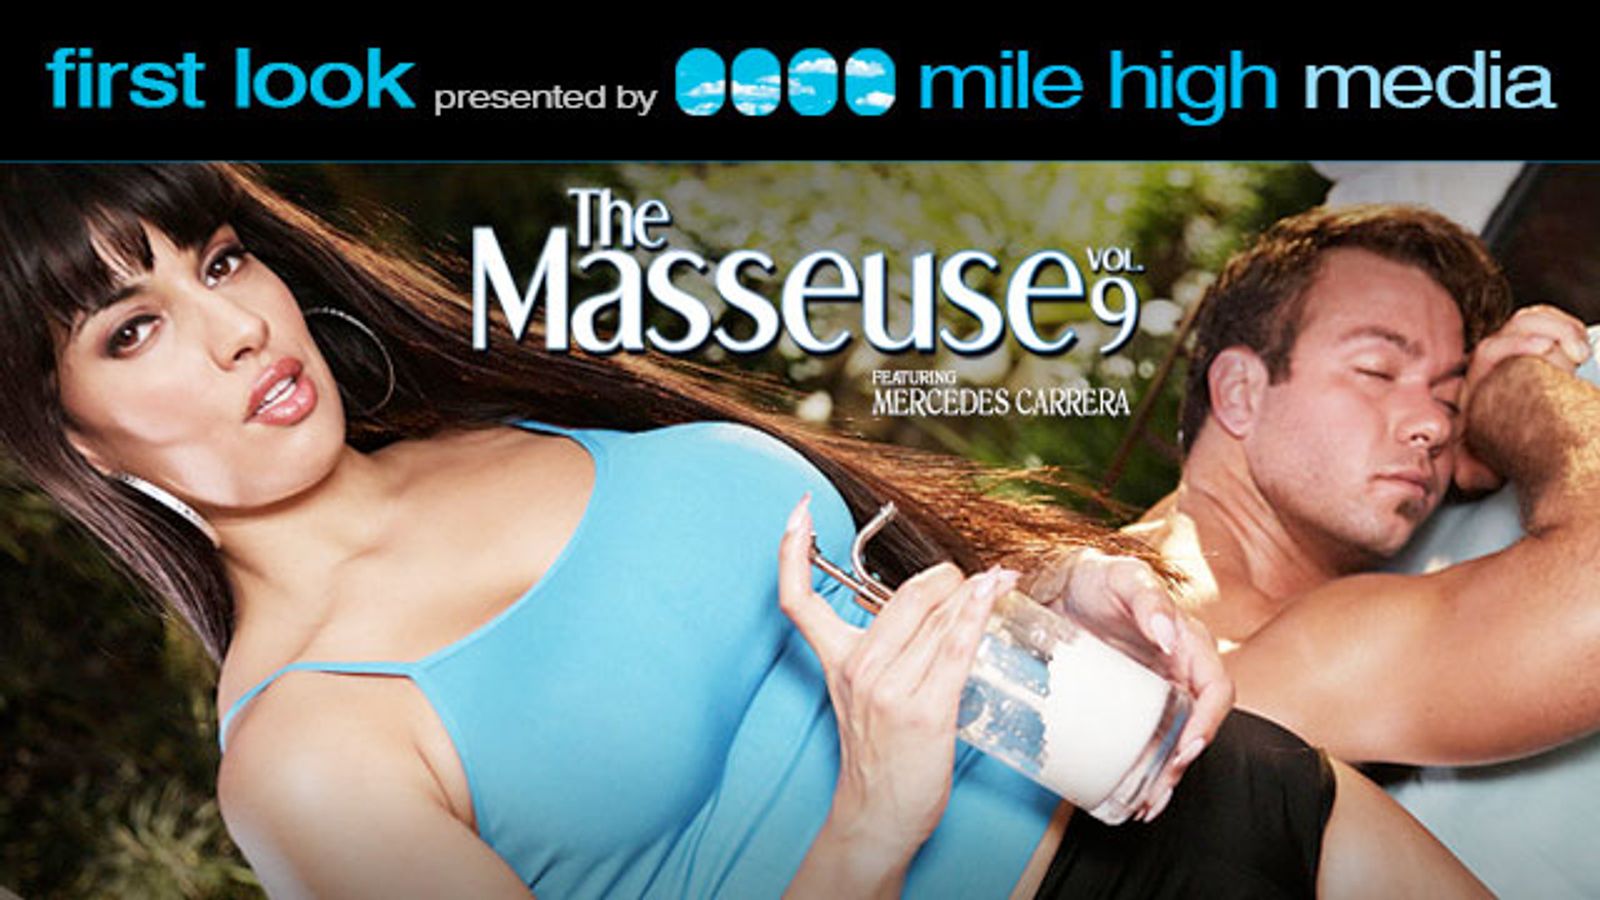 MileHighMedia.com Offers First Look at 'The Masseuse 9'